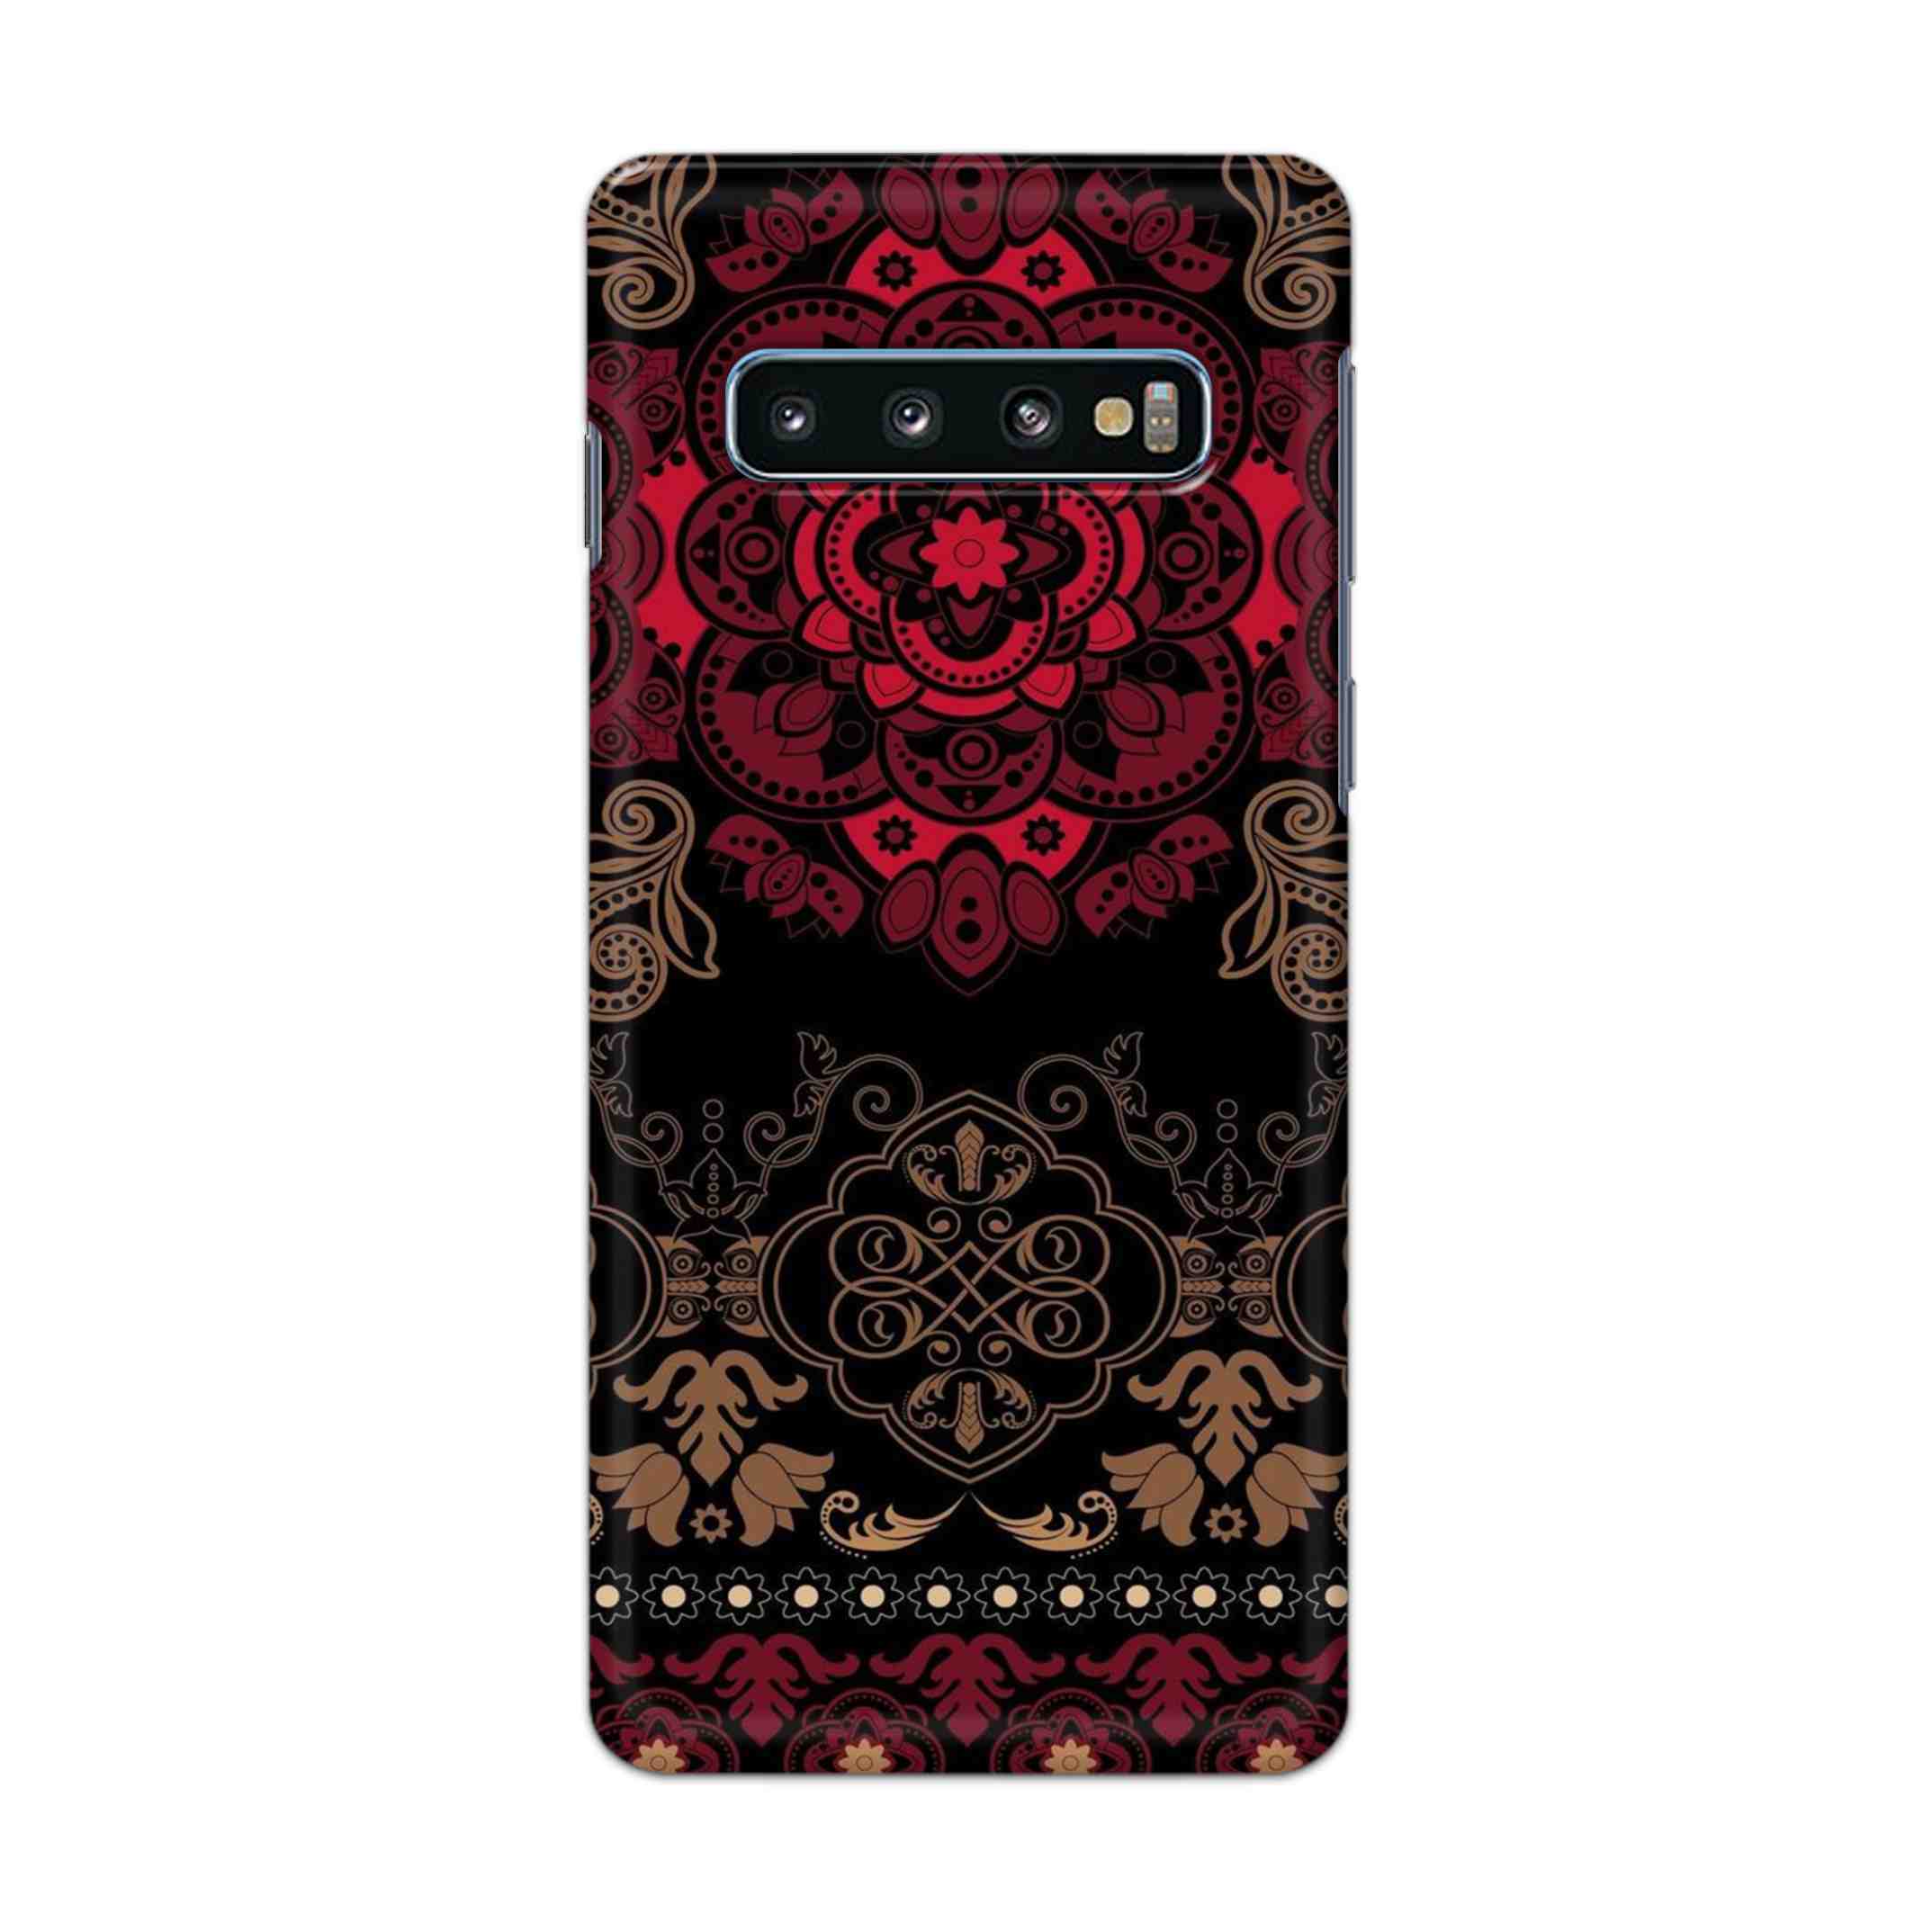 Buy Christian Mandalas Hard Back Mobile Phone Case Cover For Samsung Galaxy S10 Plus Online